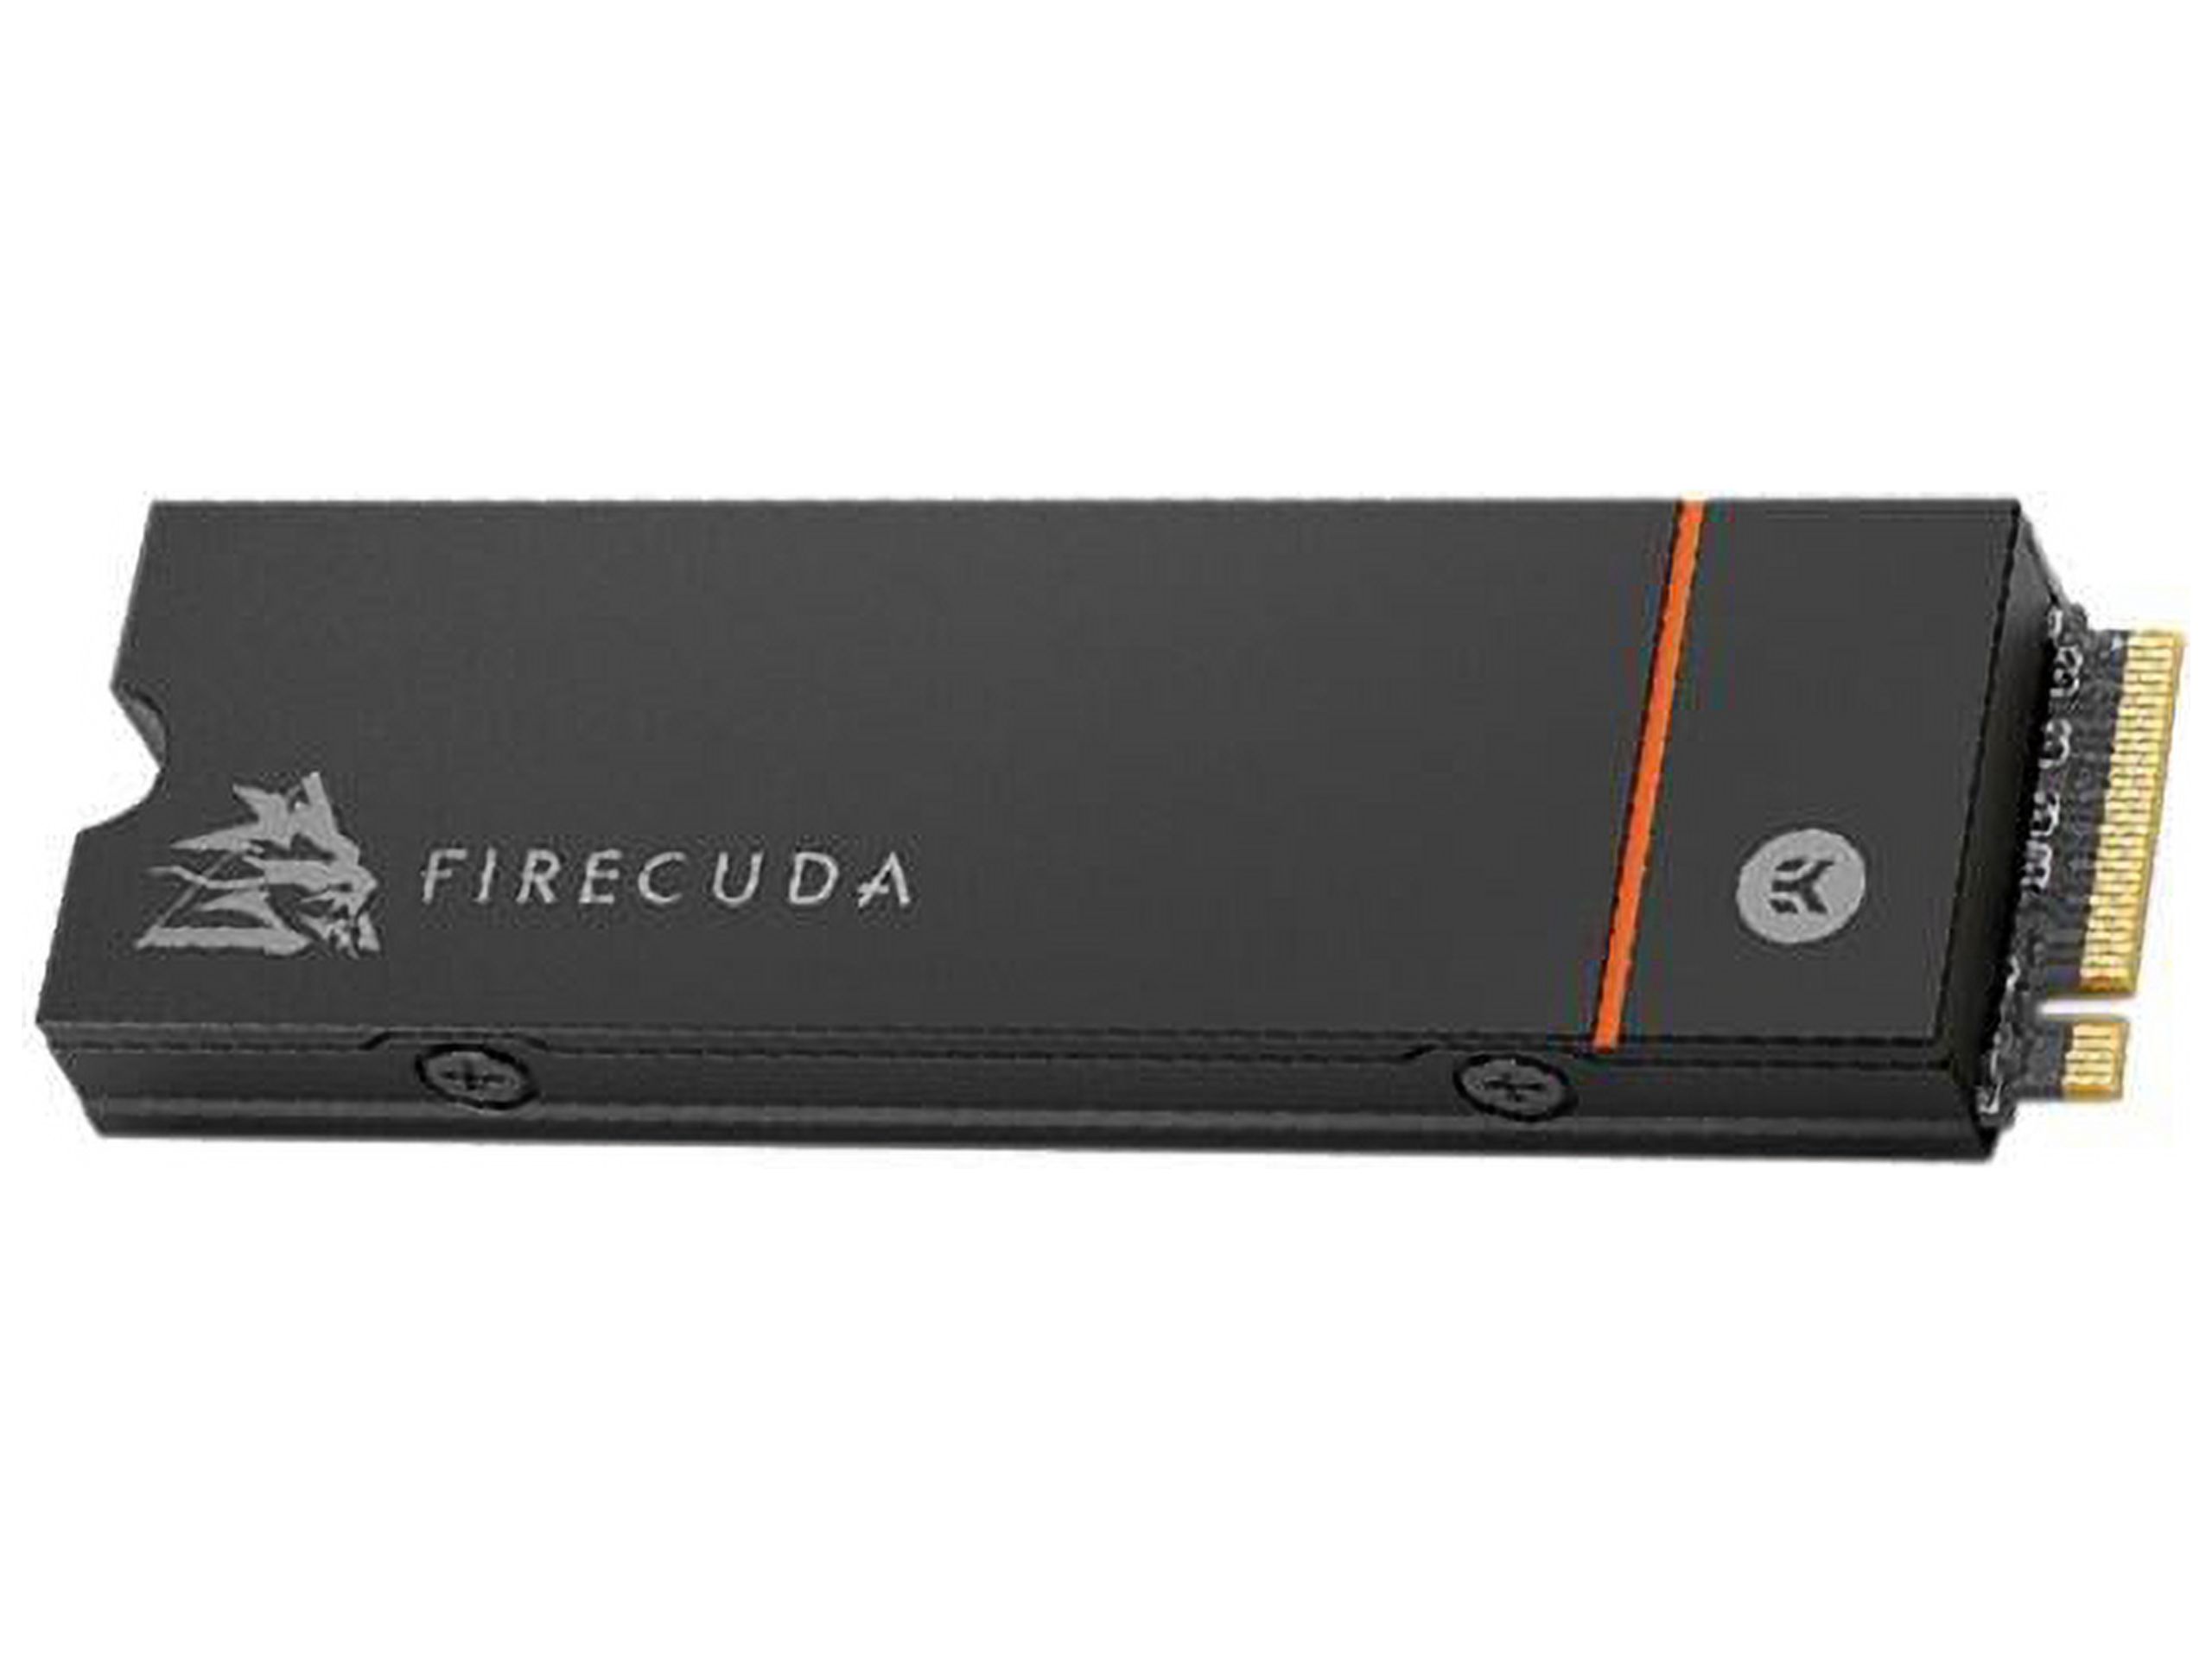 Seagate FireCuda 530 M.2 2280 4TB PCIe Gen4 x4 NVMe 1.4 3D NAND Internal Solid State Drive (SSD) ZP4000GM3A023 - image 4 of 5